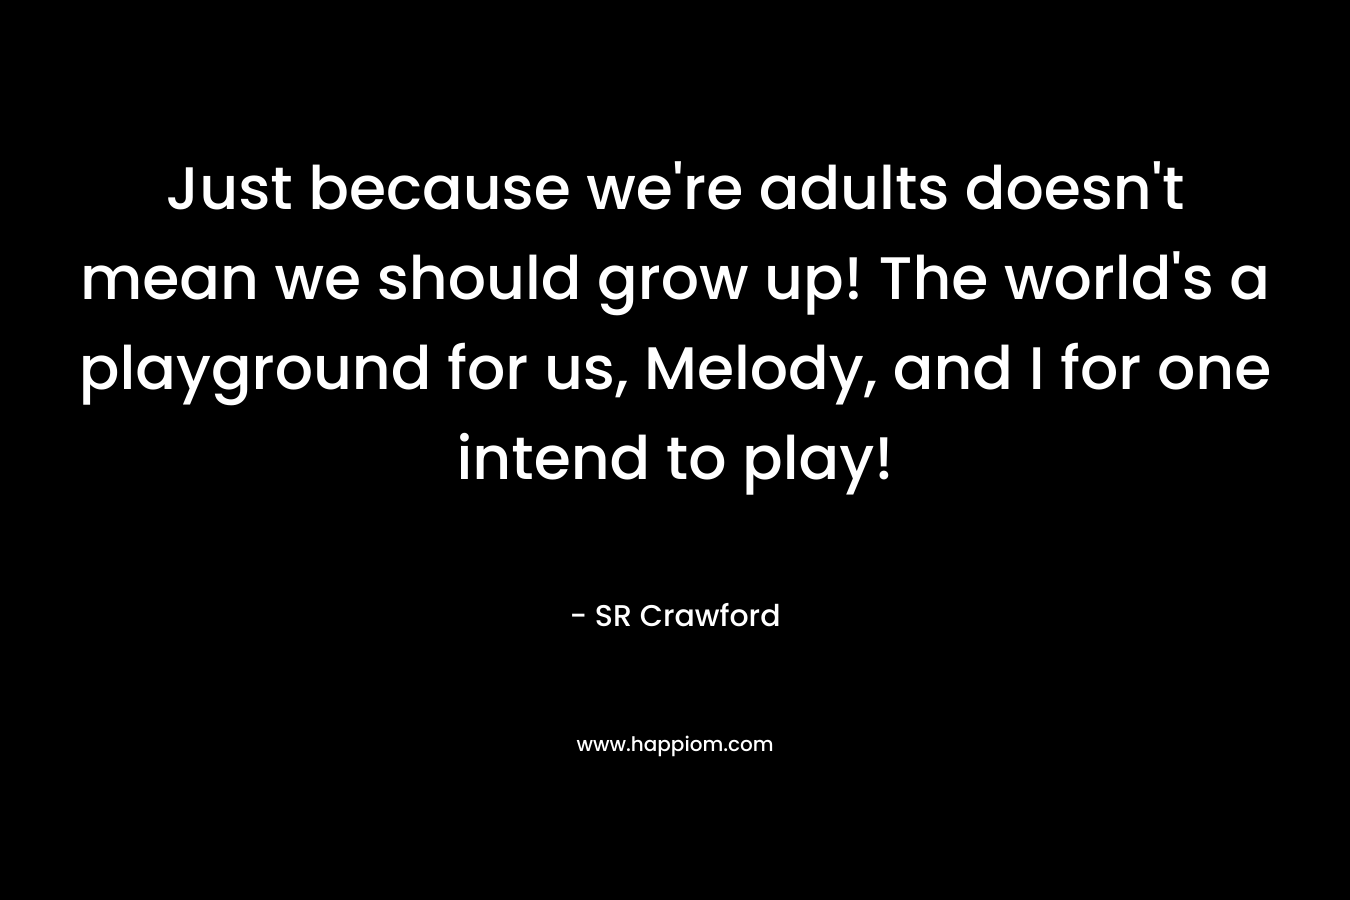 Just because we're adults doesn't mean we should grow up! The world's a playground for us, Melody, and I for one intend to play!